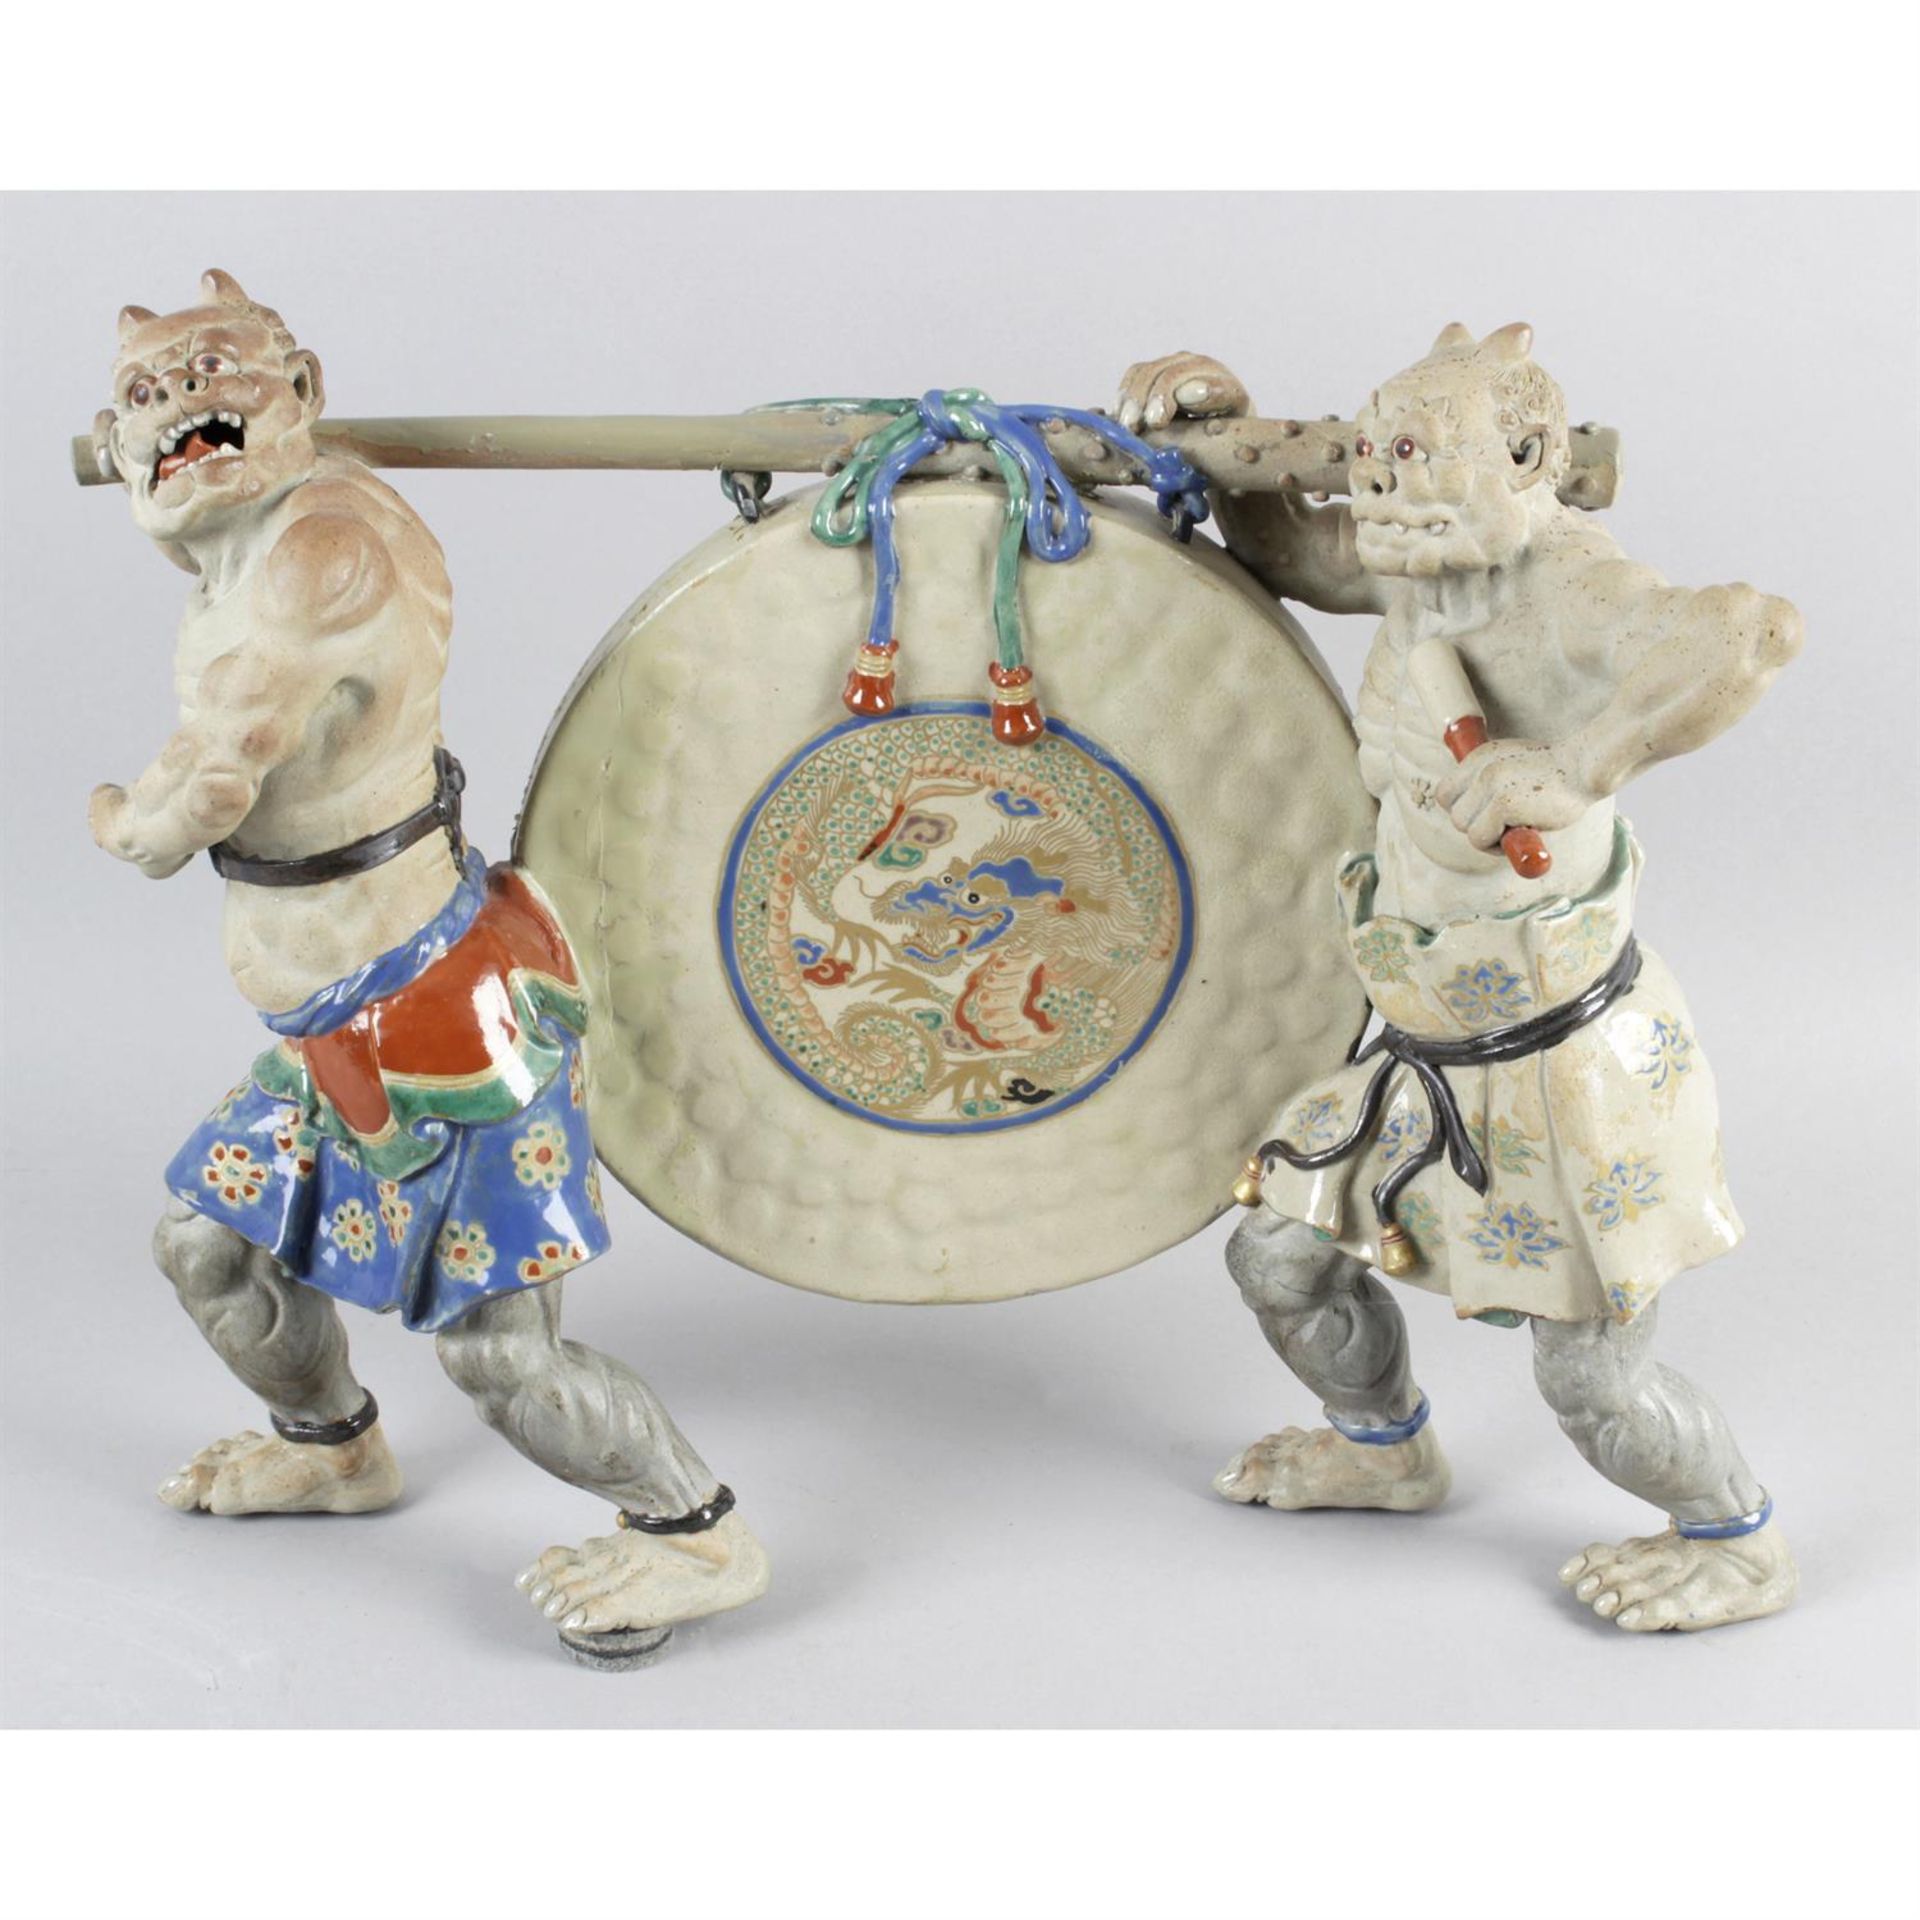 An unusual Japanese pottery figure group.